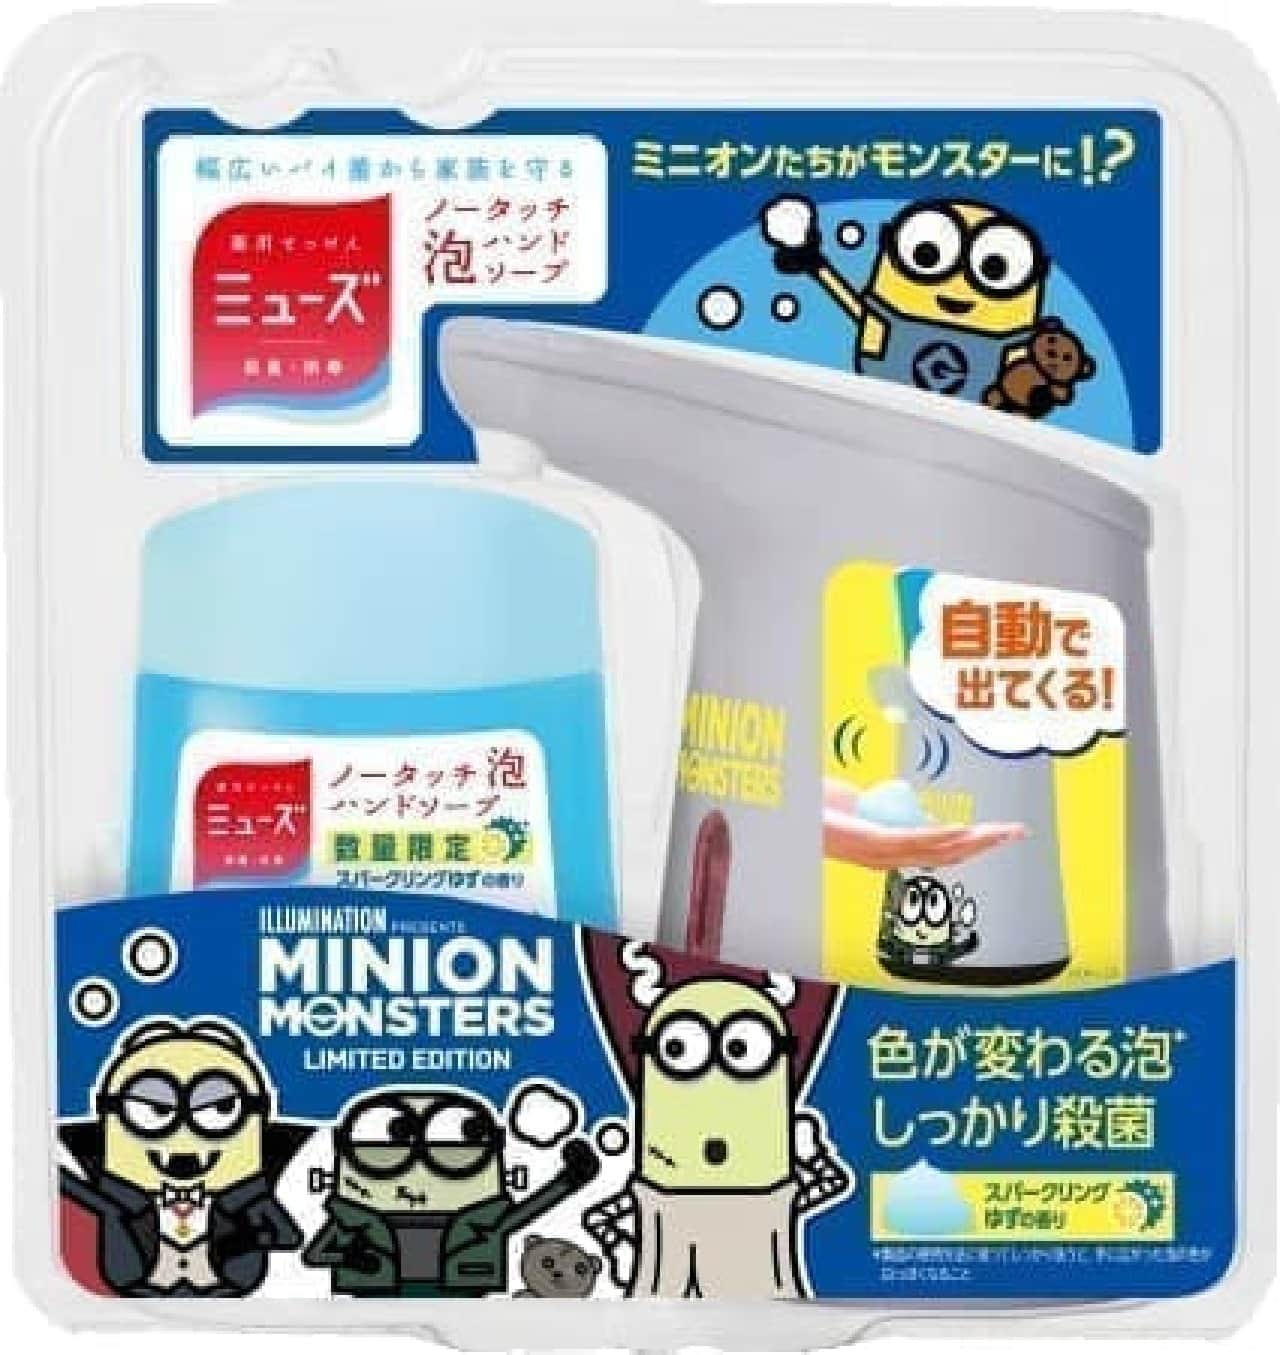 Muse No Touch Foam Hand Soap Minion Monsters